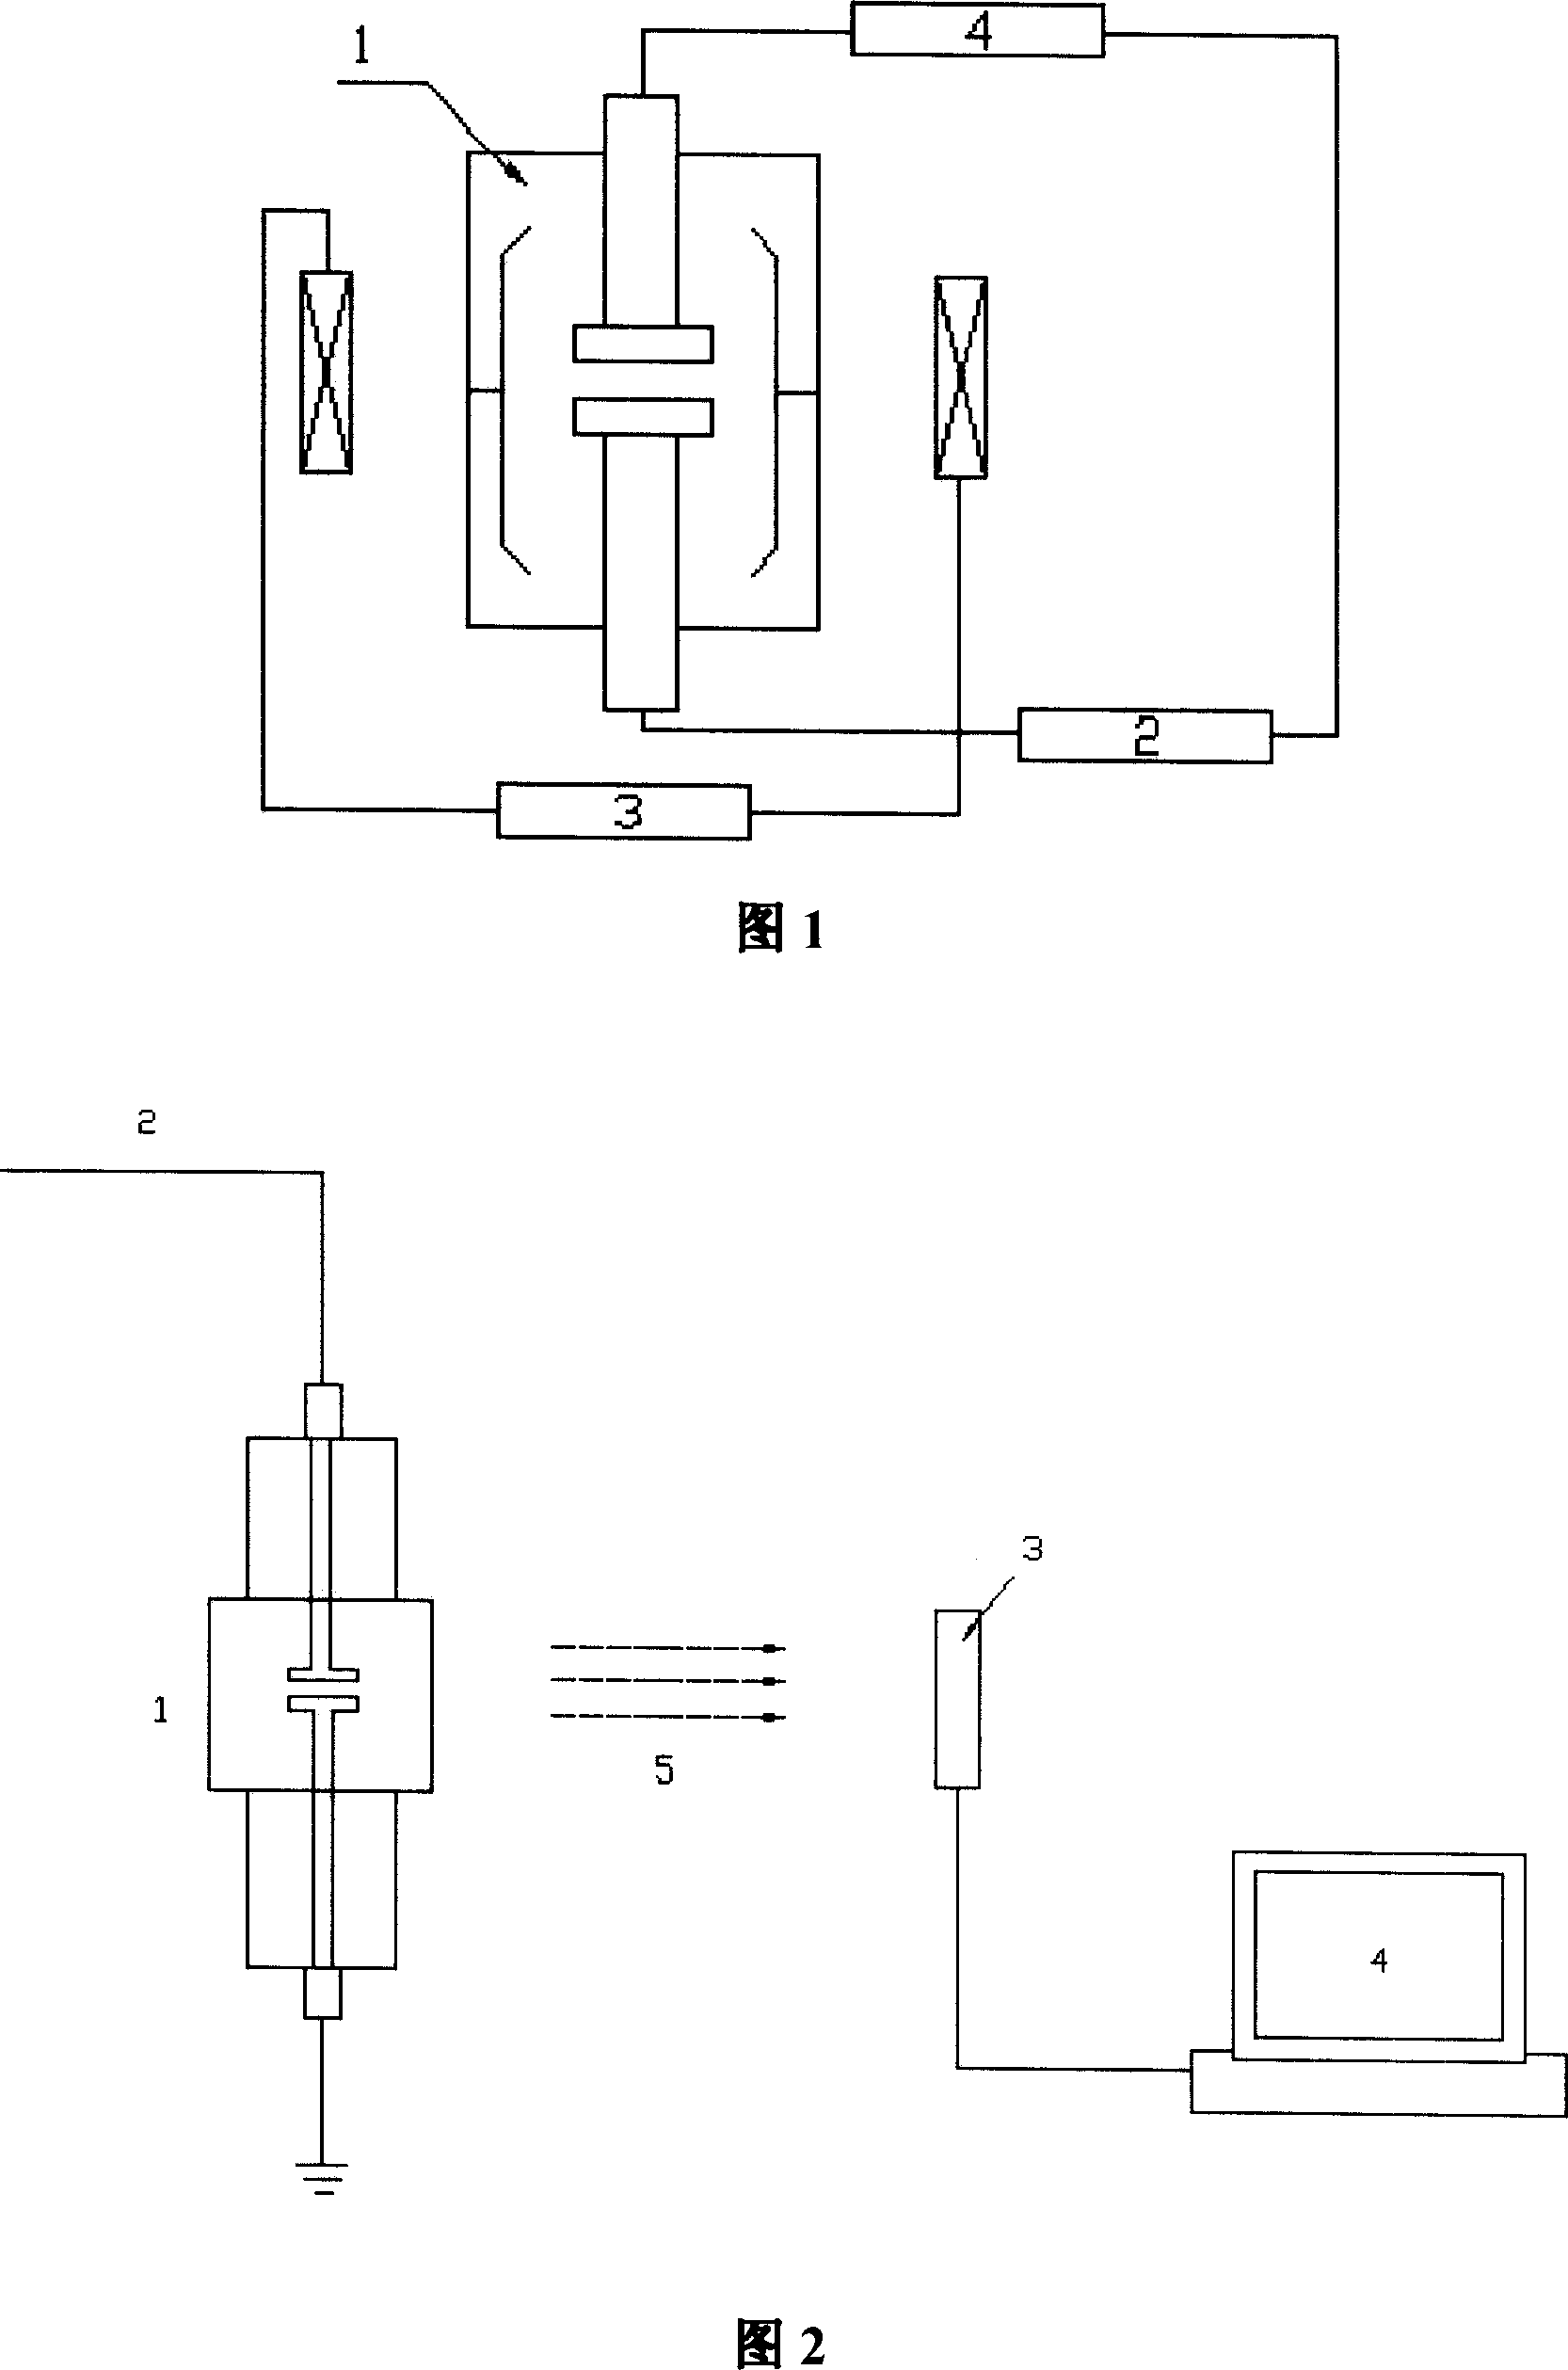 Method for measuring inner running state of vaccum arc-chutes based on X-ray capacity